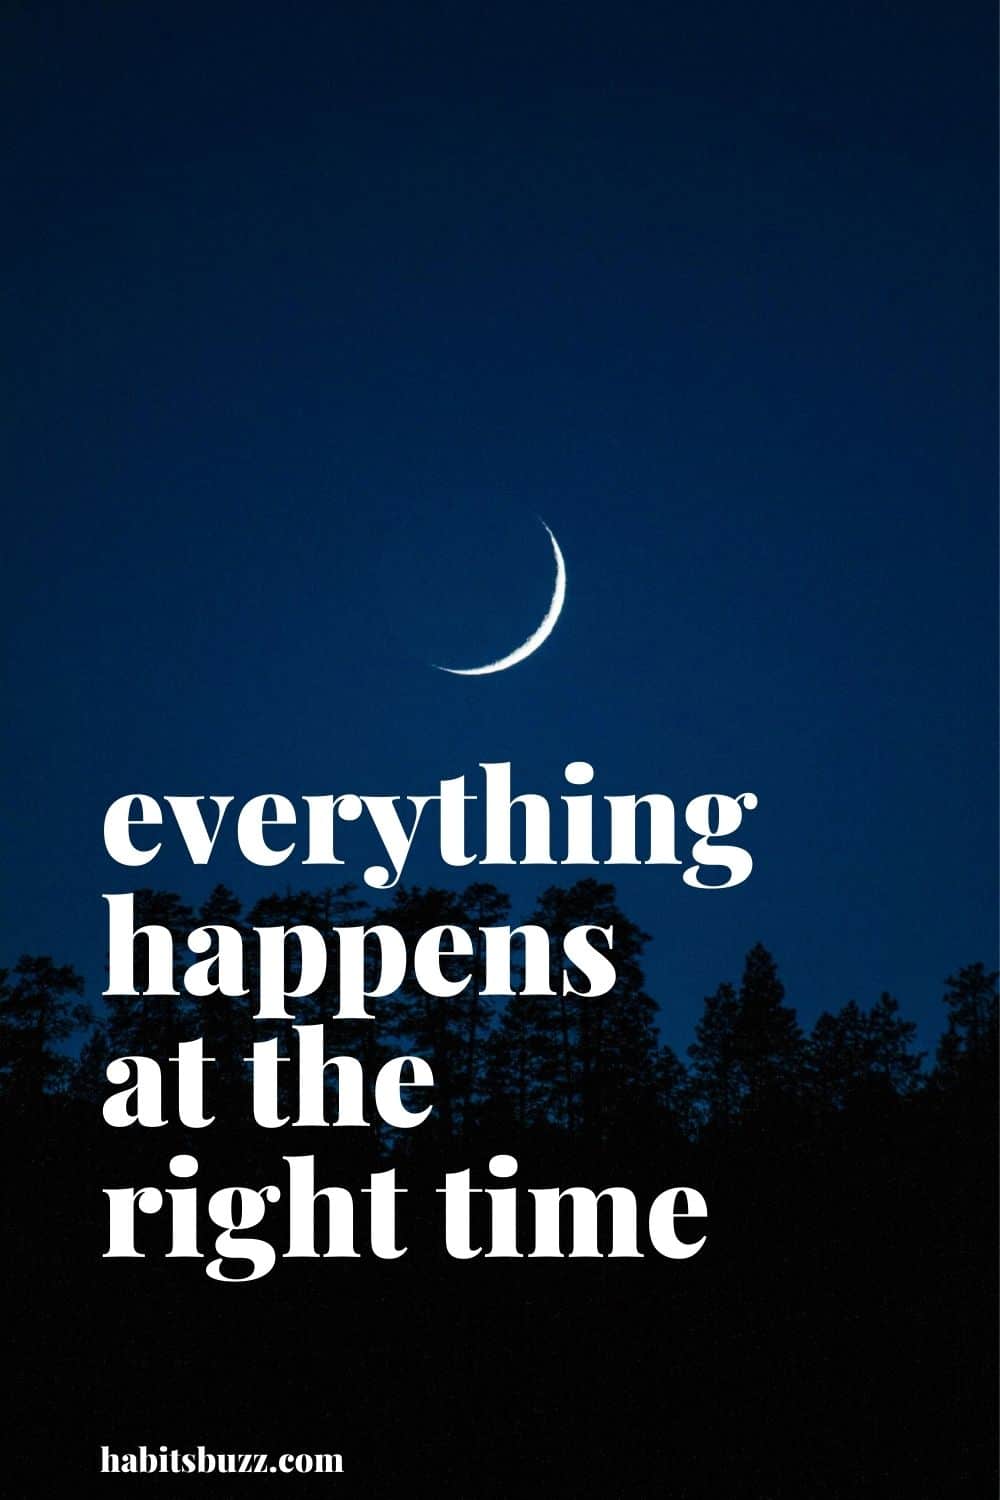 everything happens at the right time - mantras to get through bad days in life